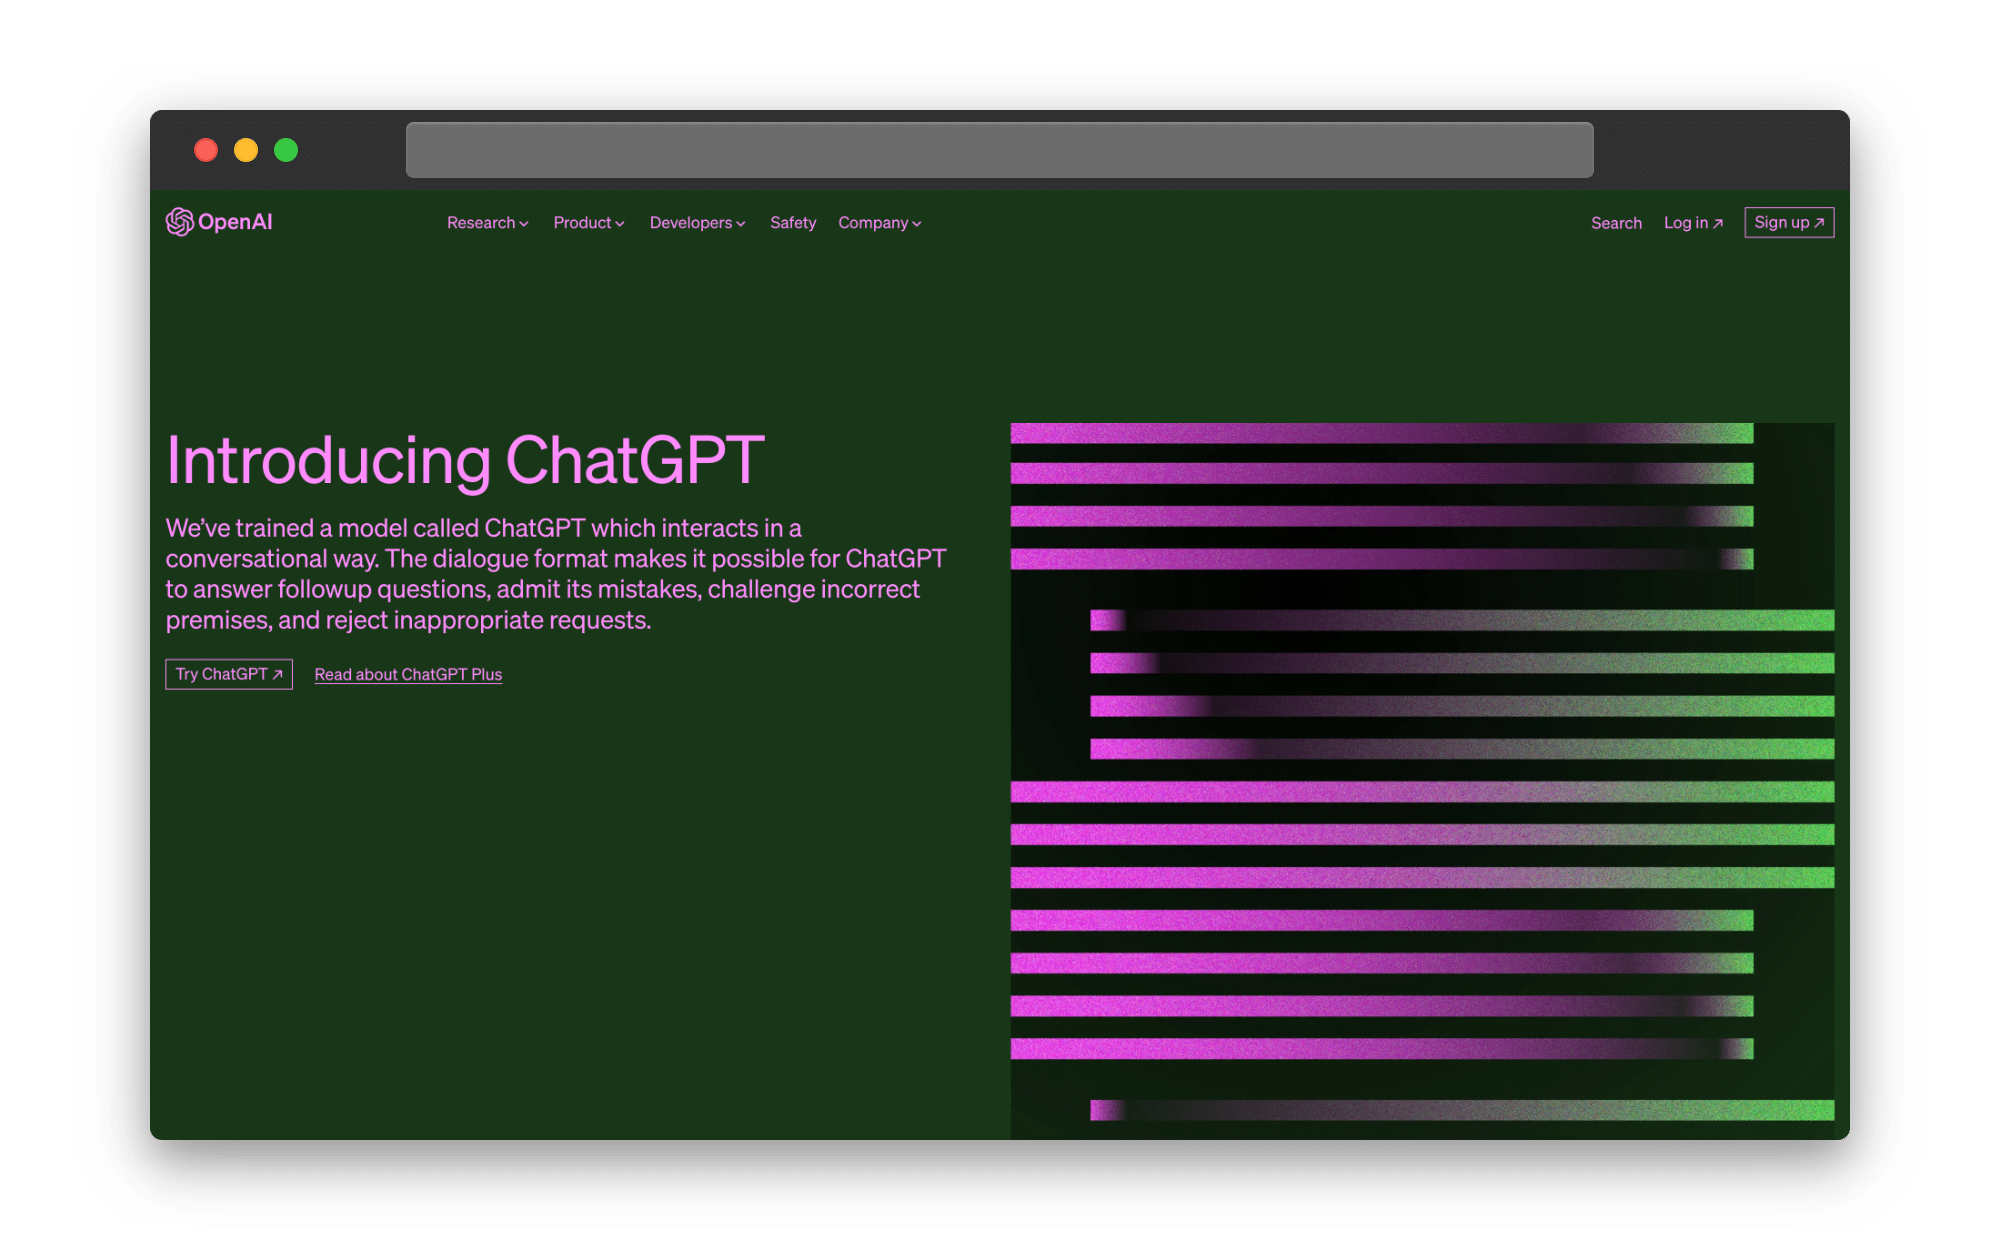 ChatGPT is a language model that harnesses the power of deep learning algorithms and a vast database to generate text similar to human-written text based on the inputs provided.